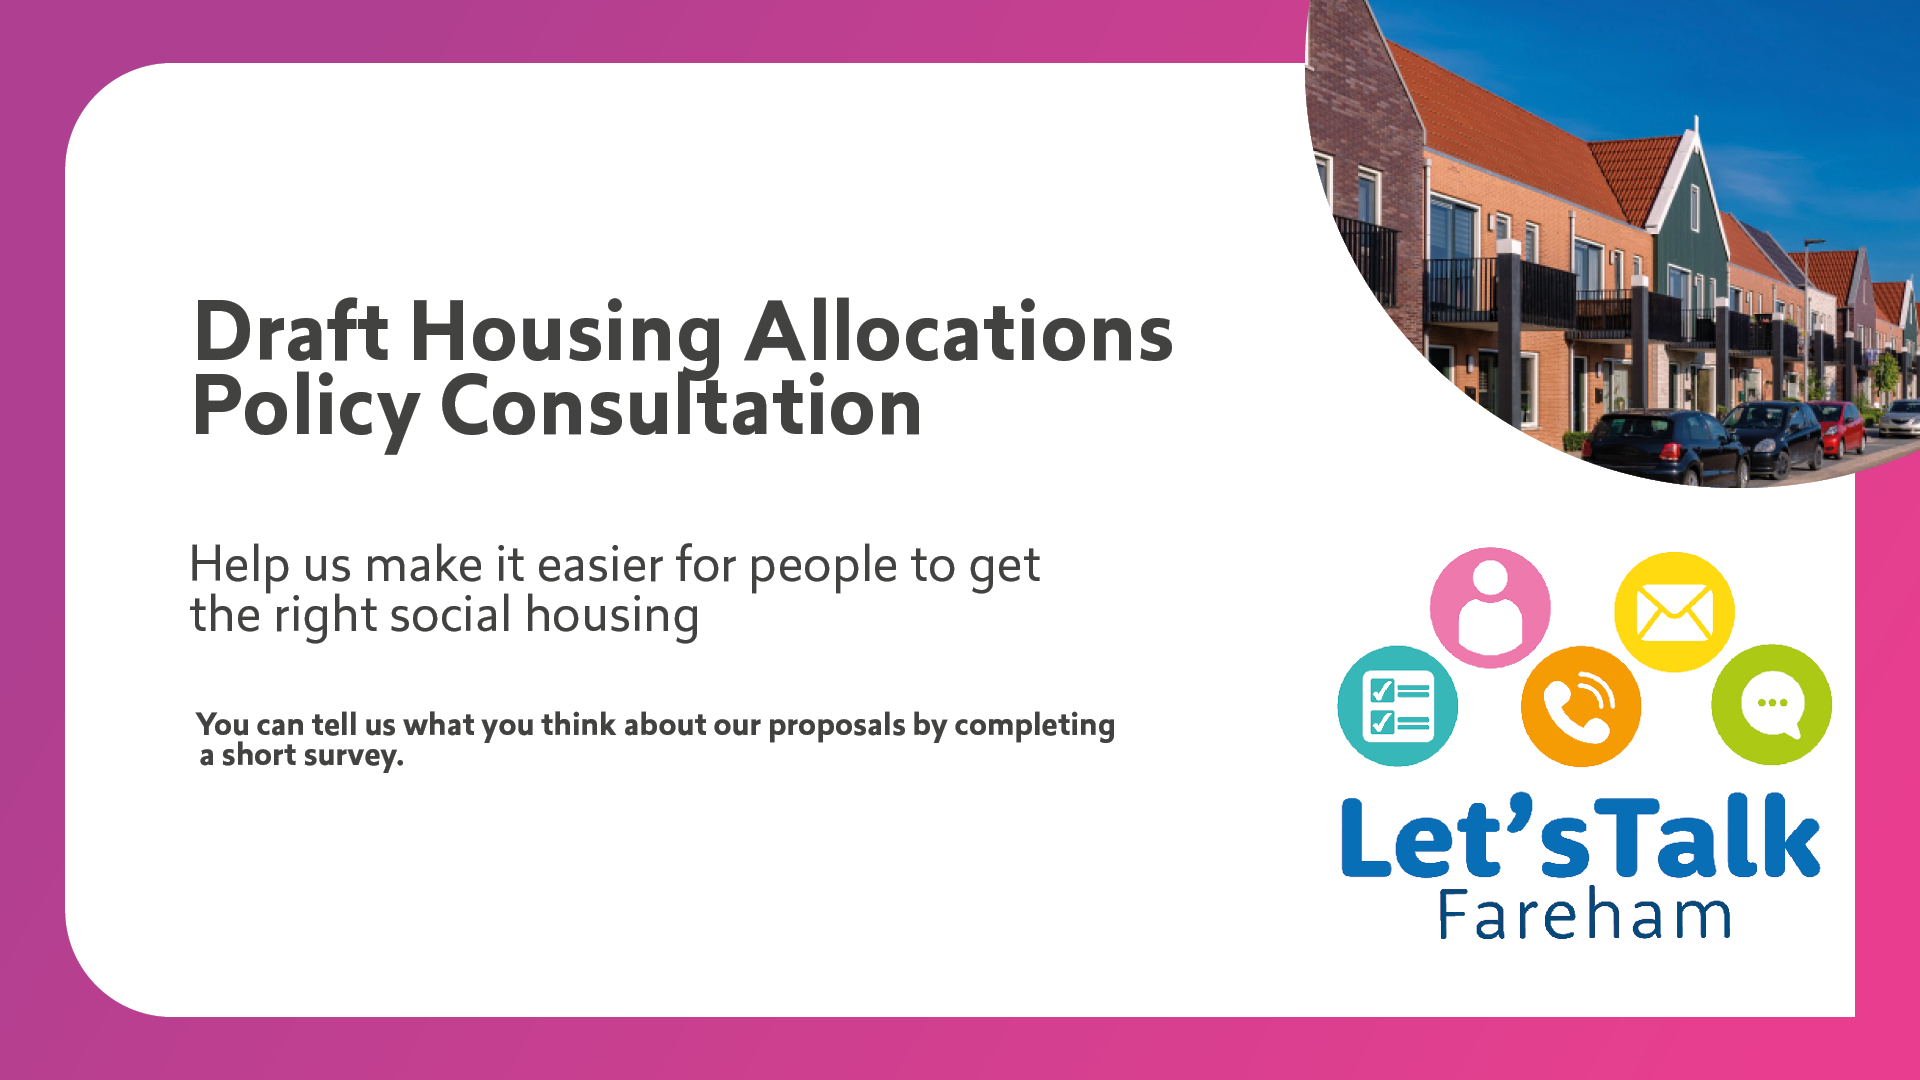 Draft Housing Allocations Policy Consultation